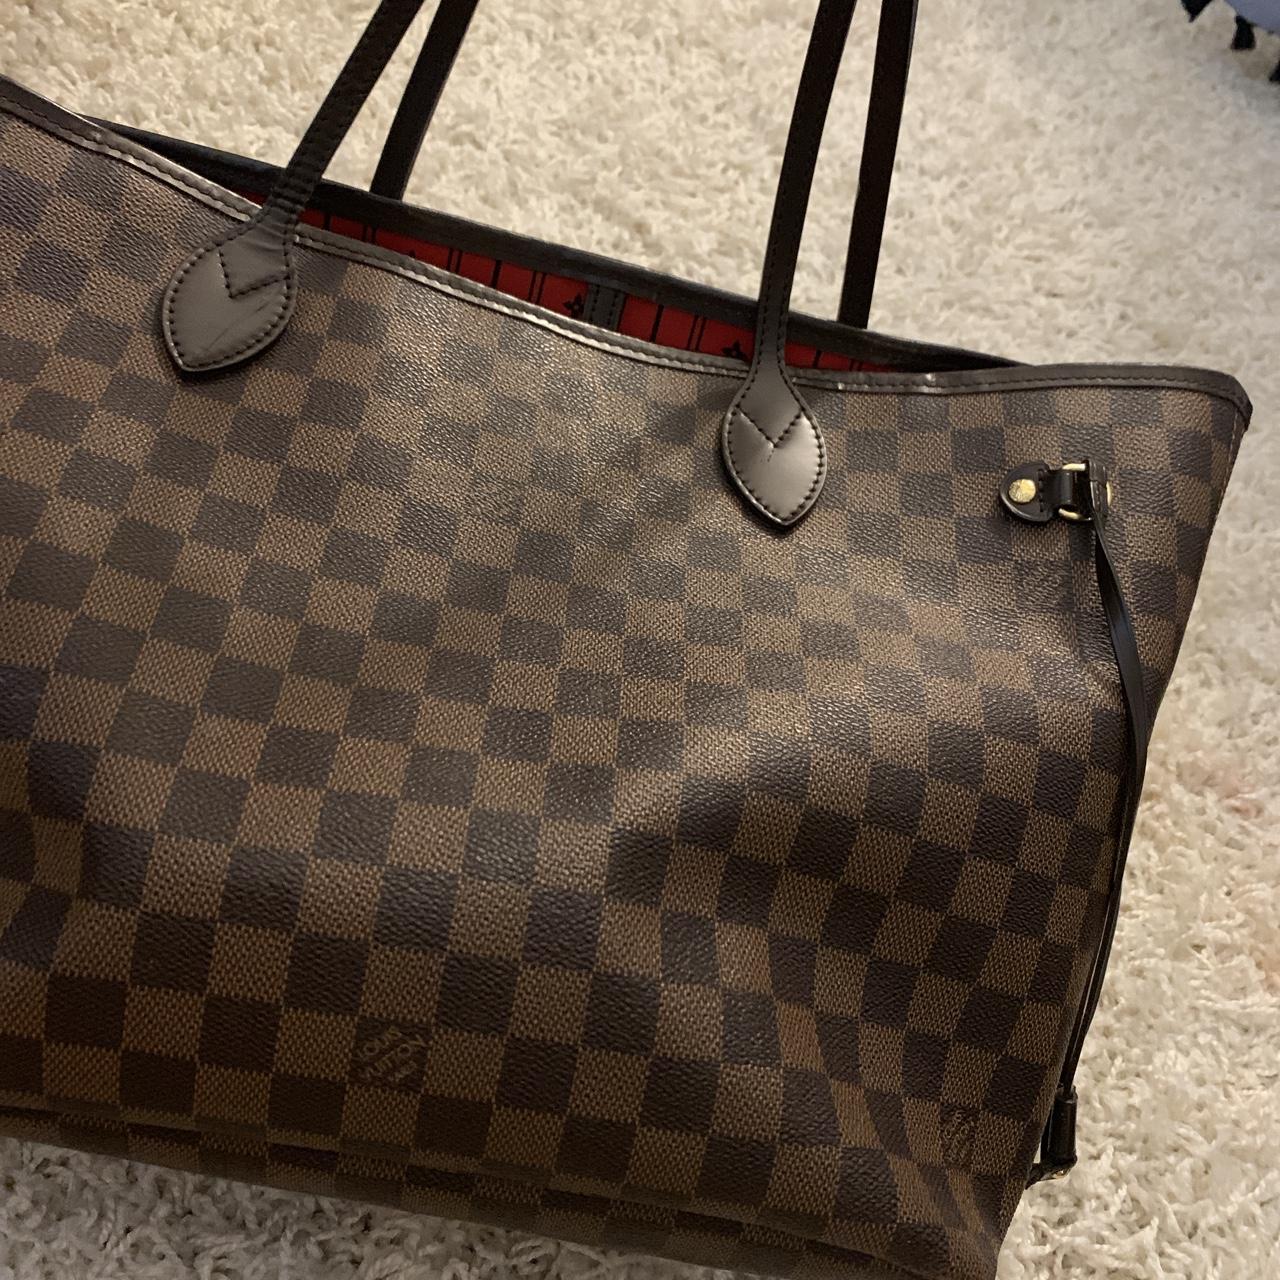 LOUIS VUITTON BAG Never used, brand new from store. - Depop